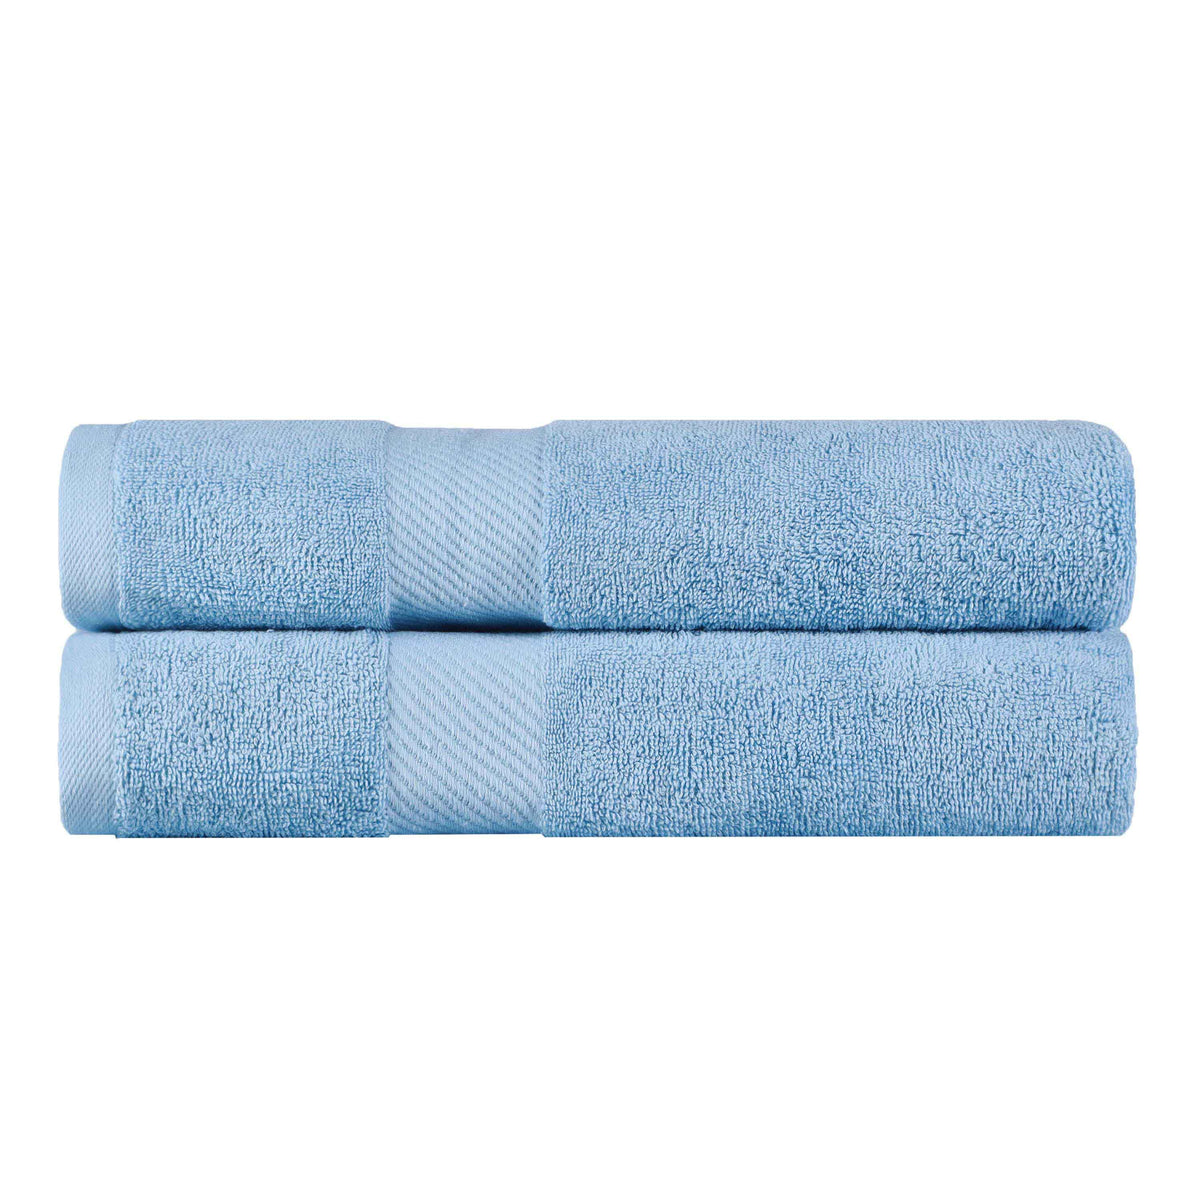 Kendell Egyptian Cotton Solid Medium Weight Bath Towel Set of 2